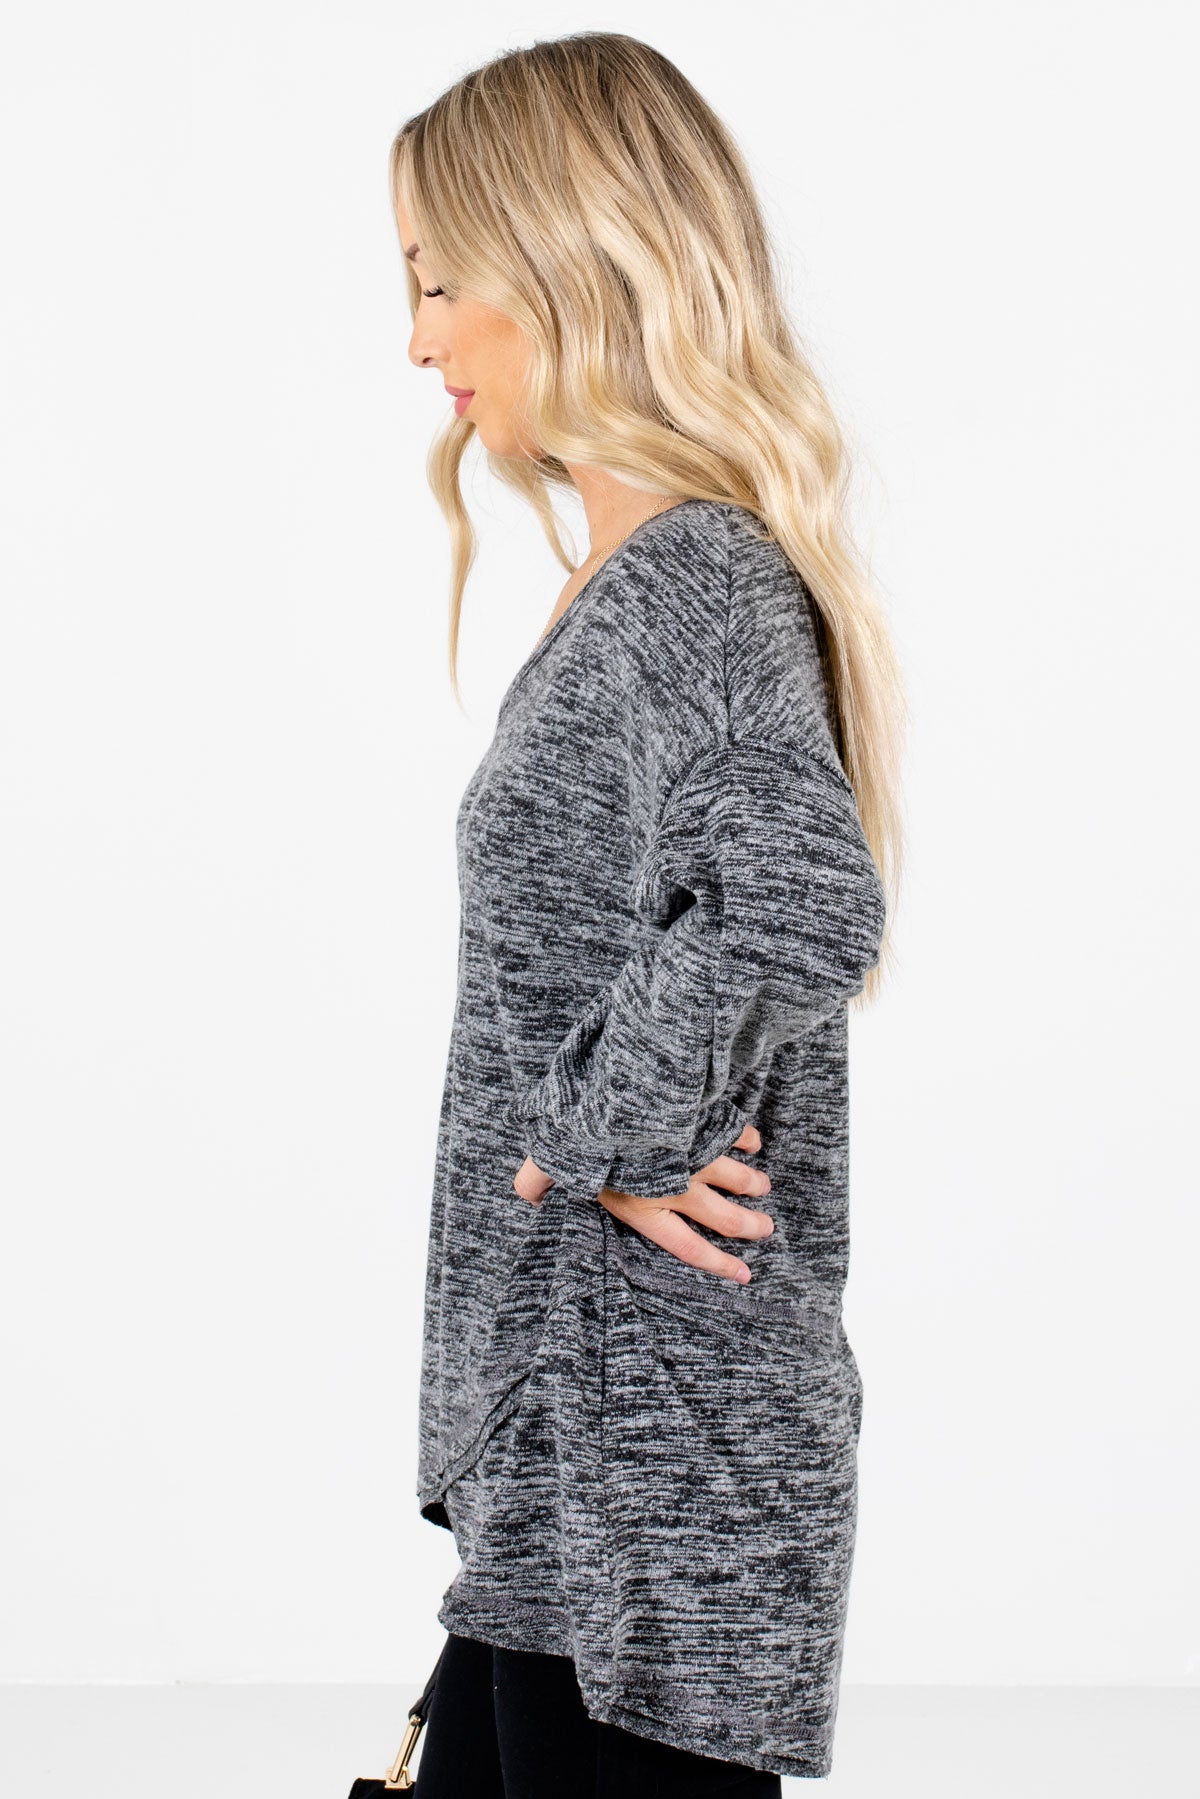 Charcoal Gray Overlay High-Low Hem Boutique Tops for Women